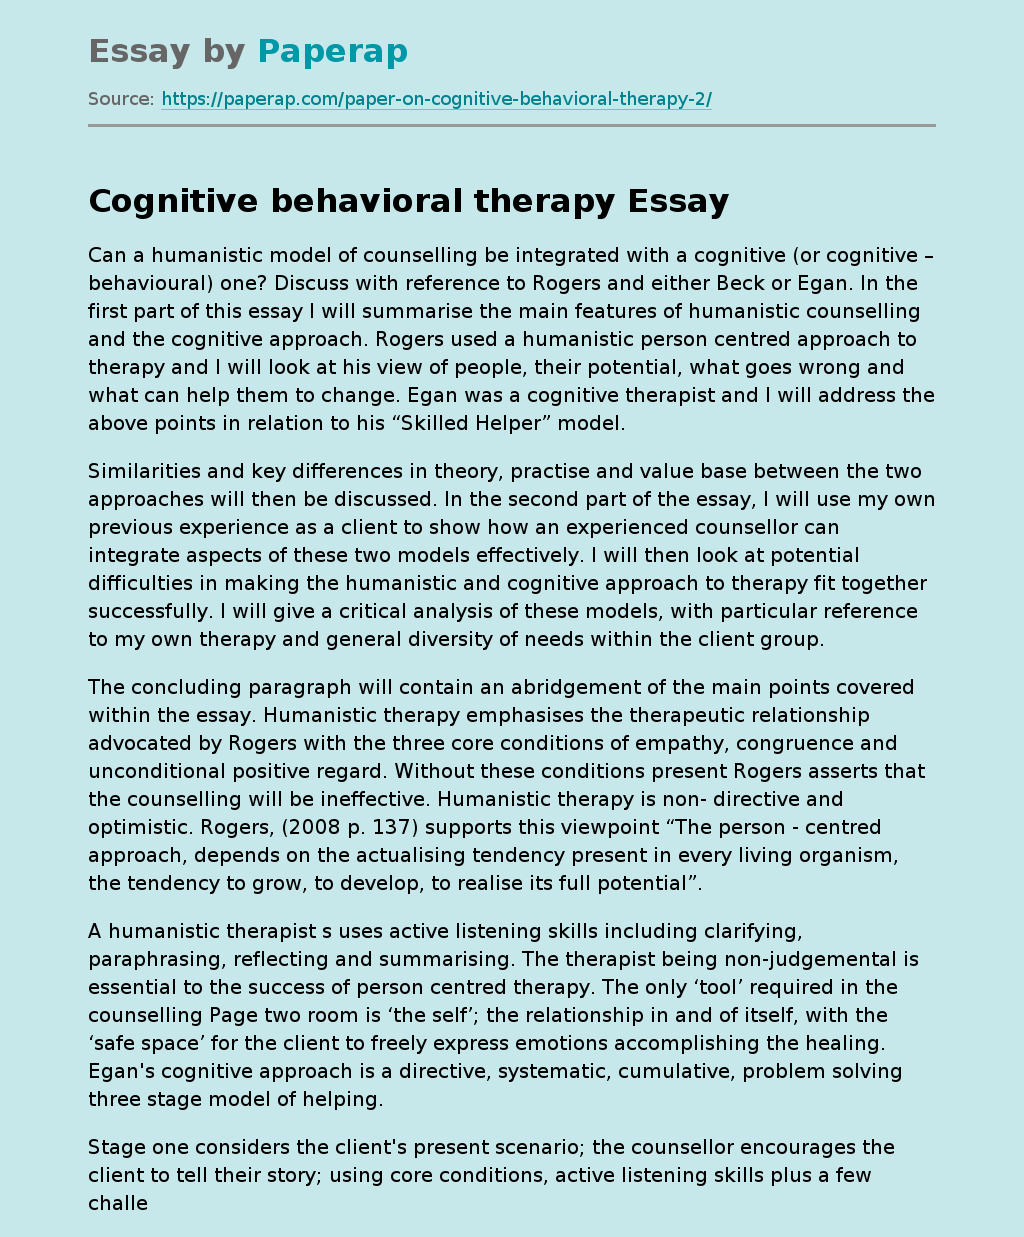 The Cognitive Behavioral Therapy